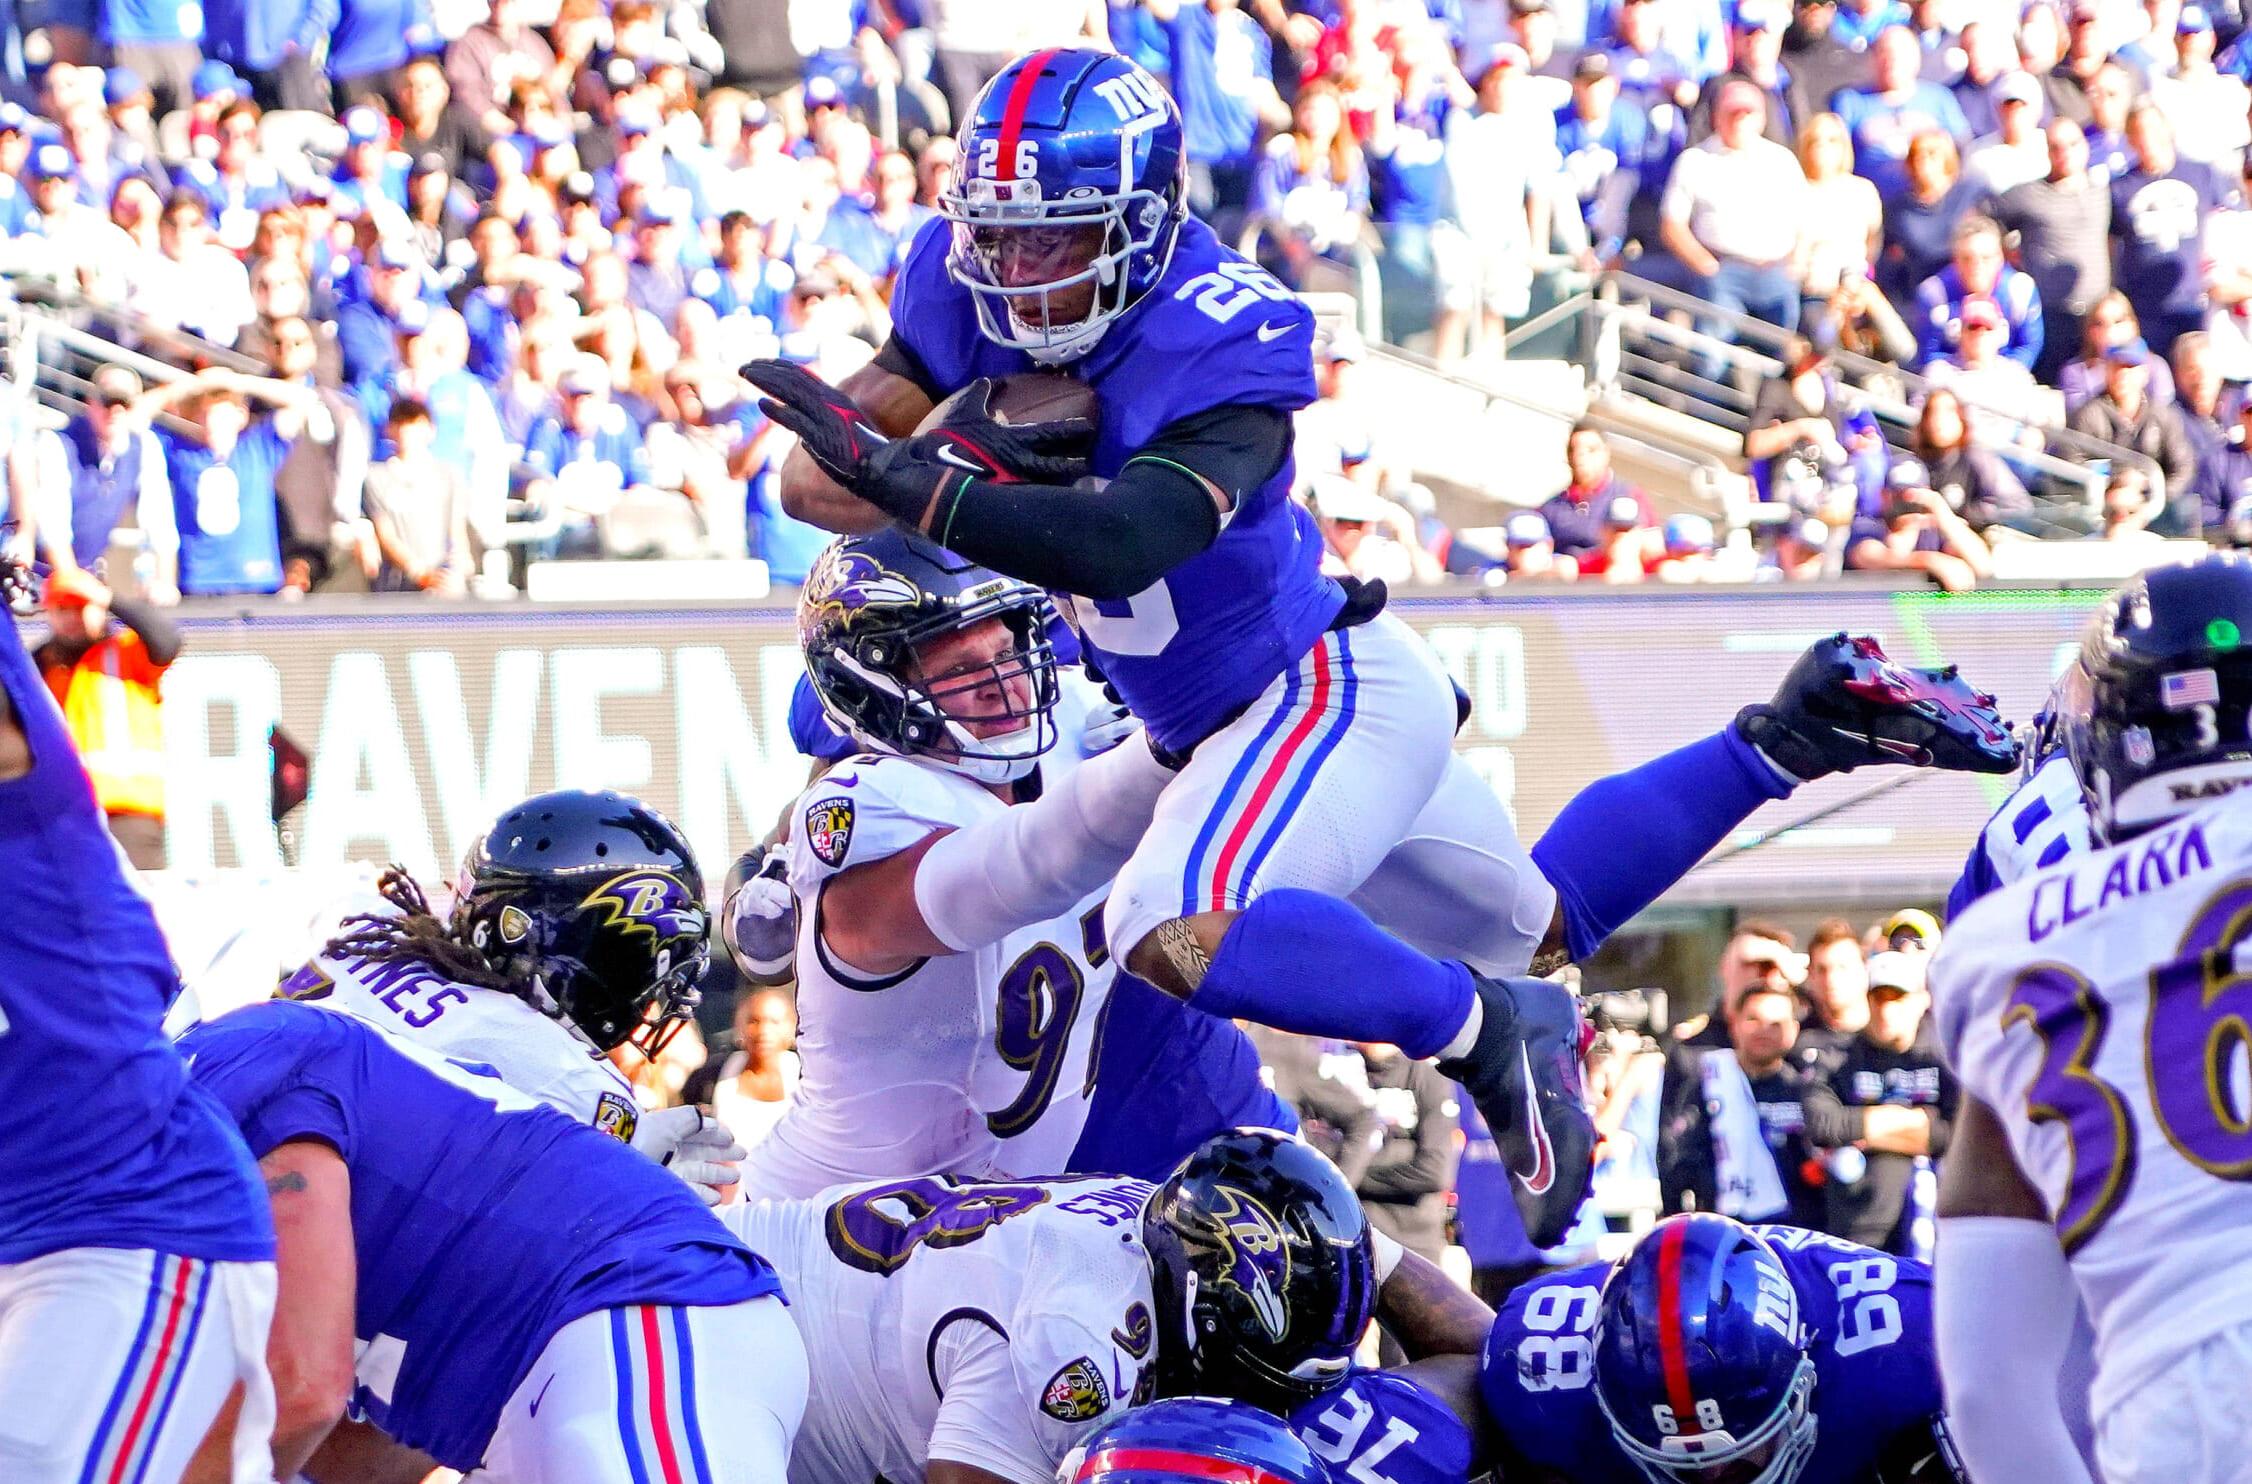 New York Giants and Jets rebuilds are ahead of schedule after stunning  upset wins in Week 6